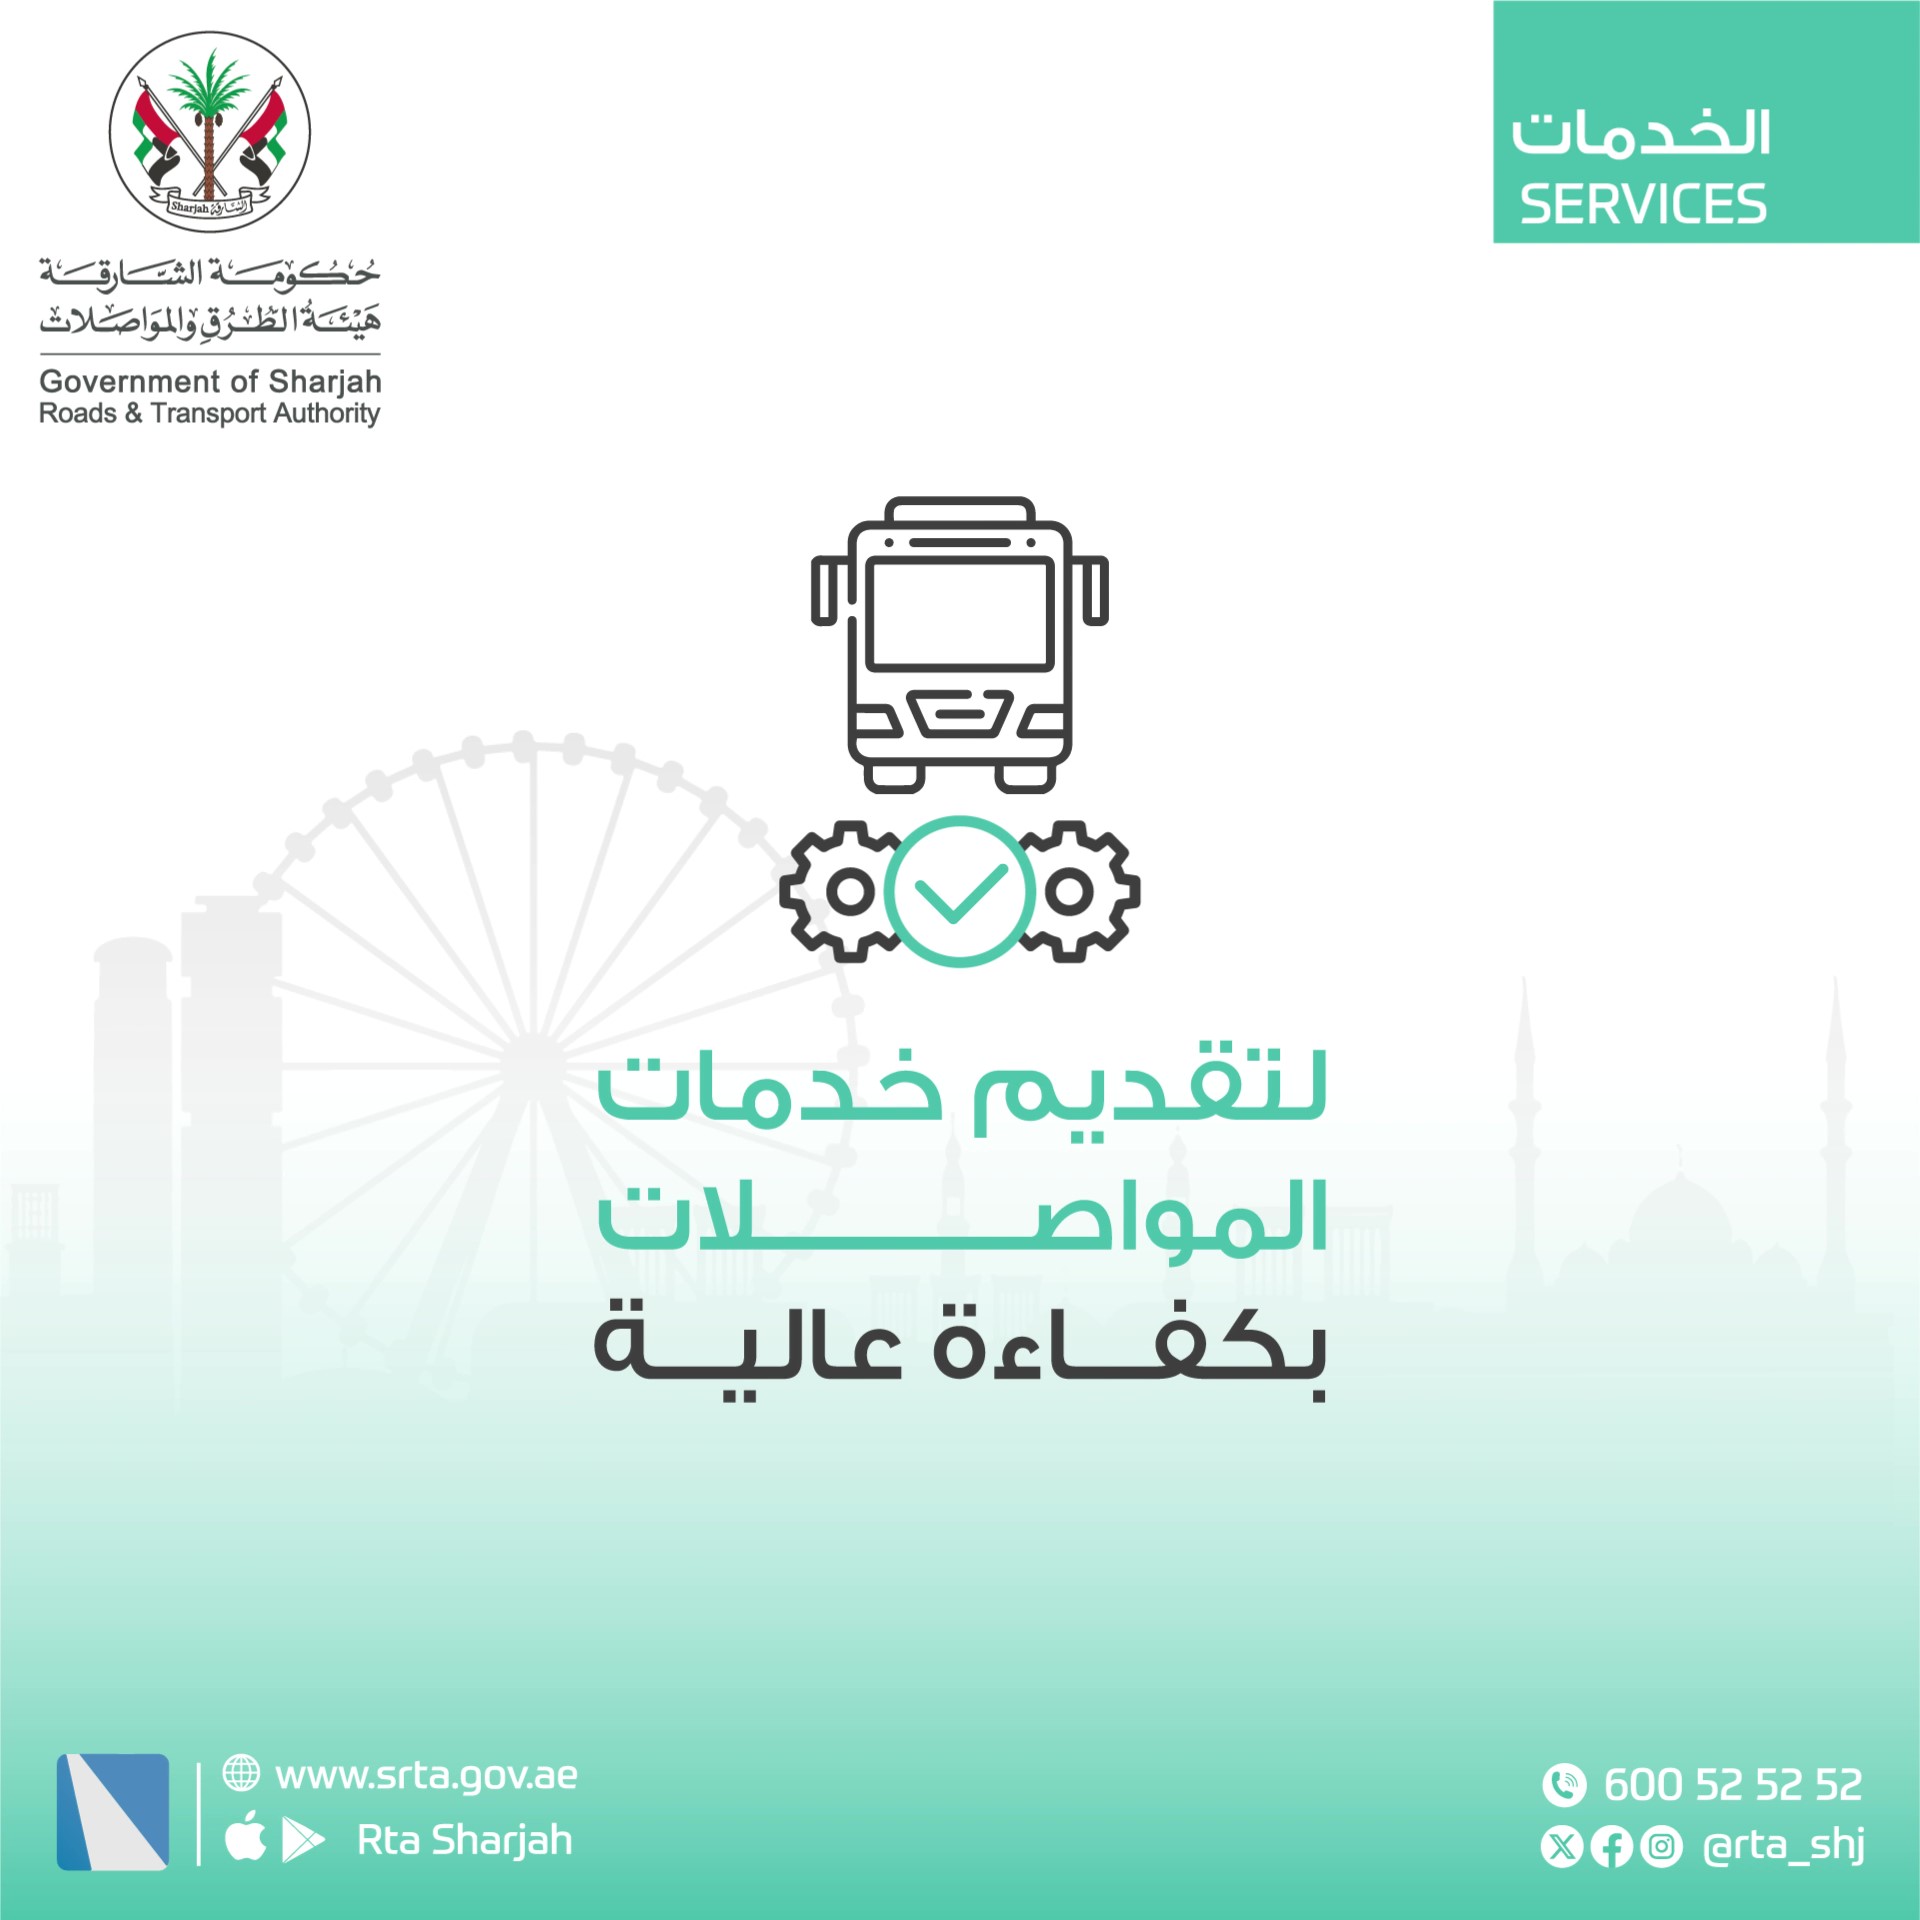 SRTA provides the service “Renewing a driver’s permit card for transportation companies affiliated with the Sharjah Emirate.”